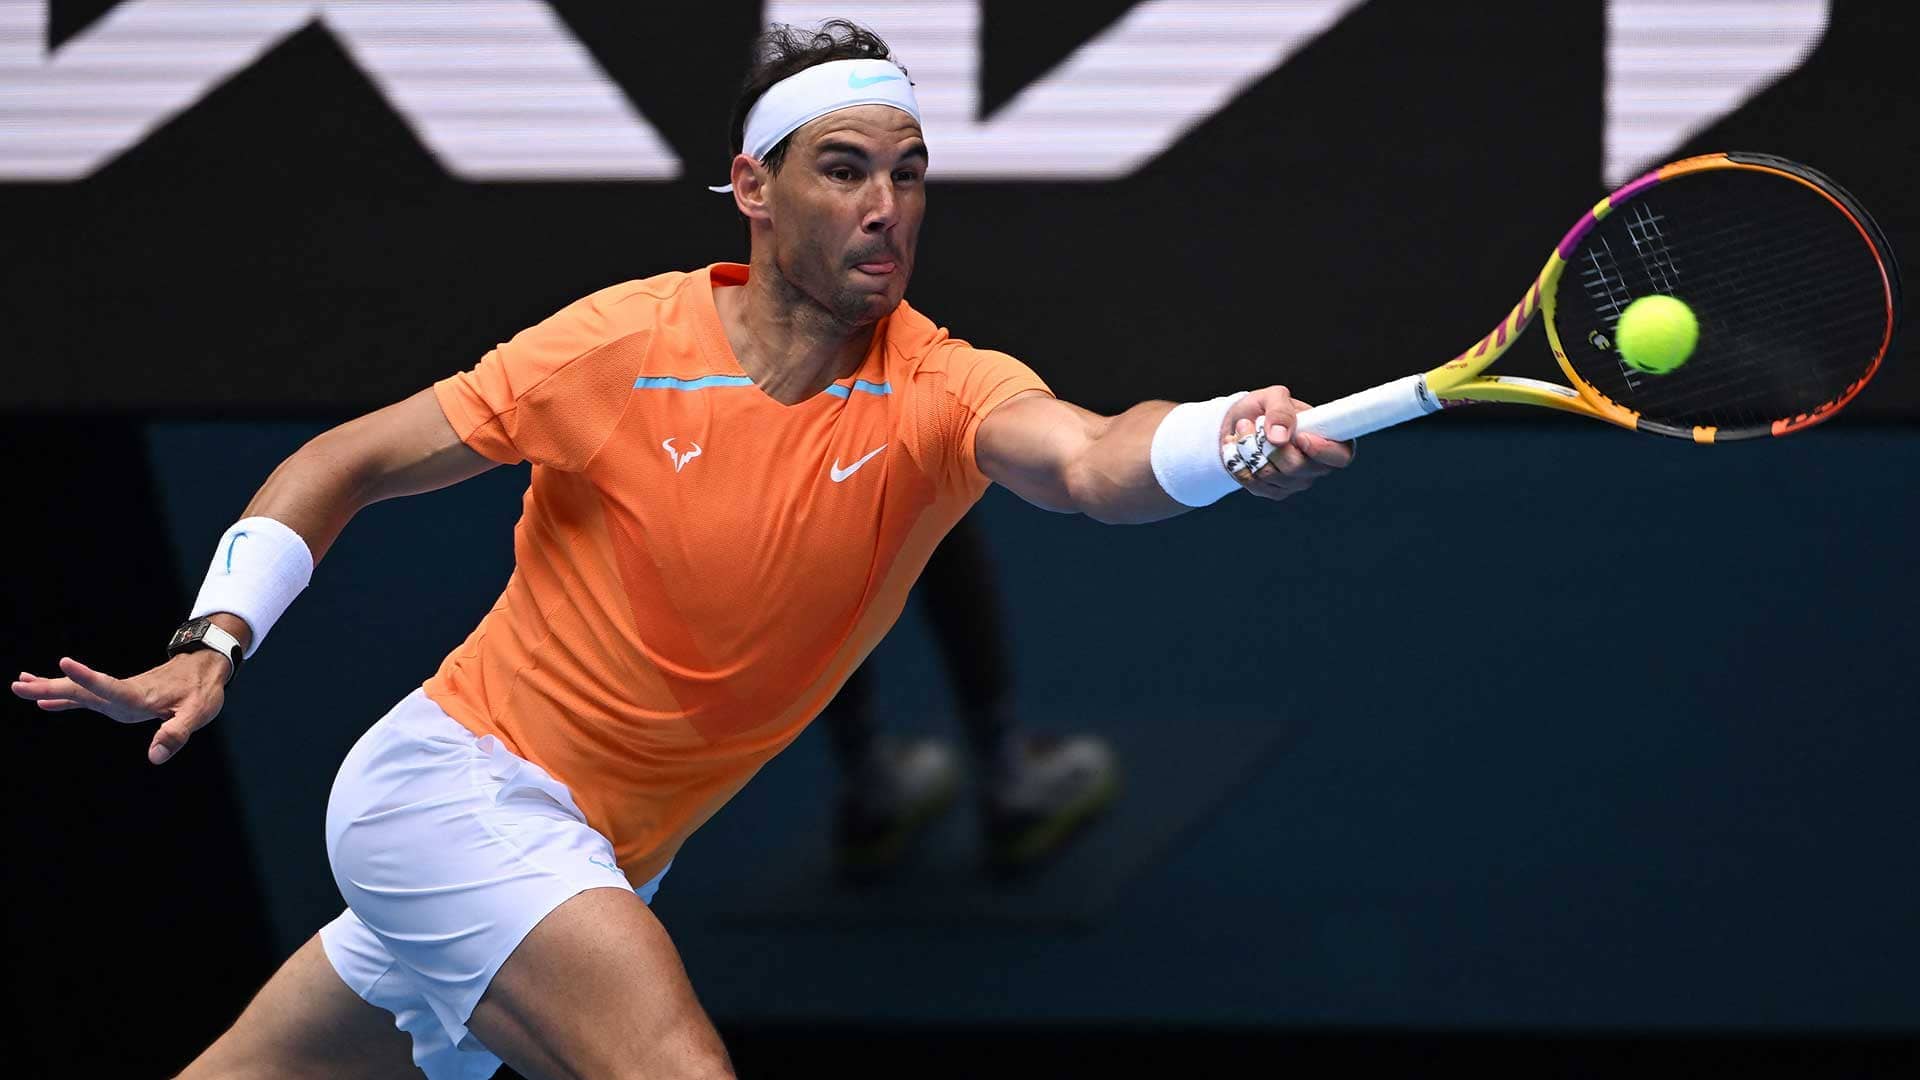 Rafael Nadal is chasing a record-extending 23rd Grand Slam title this fortnight at Melbourne Park.